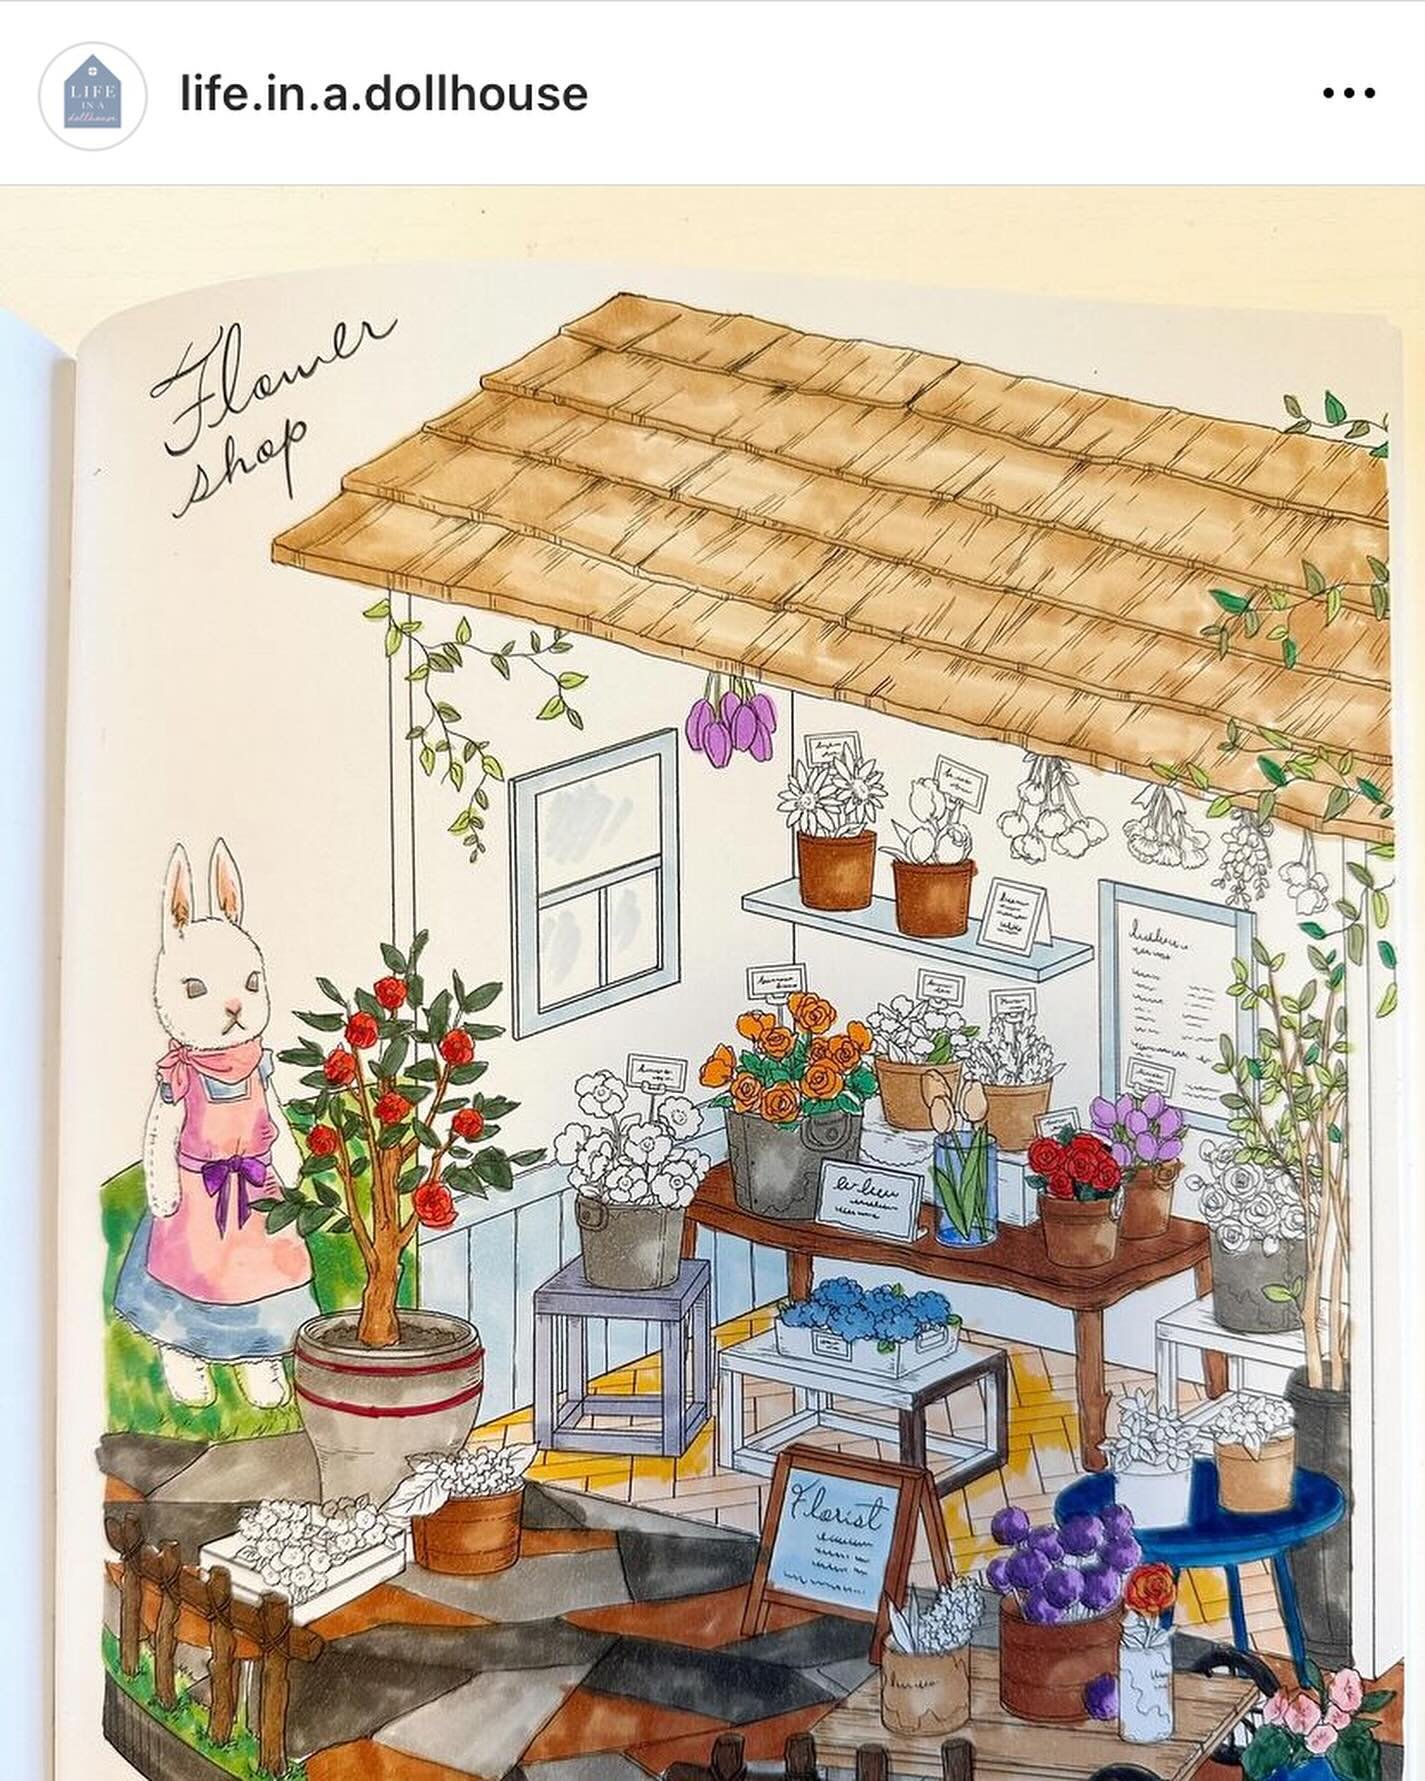 Head over to @life.in.a.dollhouse to see her beautiful work and enter for a chance to win a copy of our #antiquedollhousecoloringbook 🥰🥰🥰
.
.
#zakkaworkshop #coloringbook #adultcoloringbook #grownupcoloring #coloringiveaway